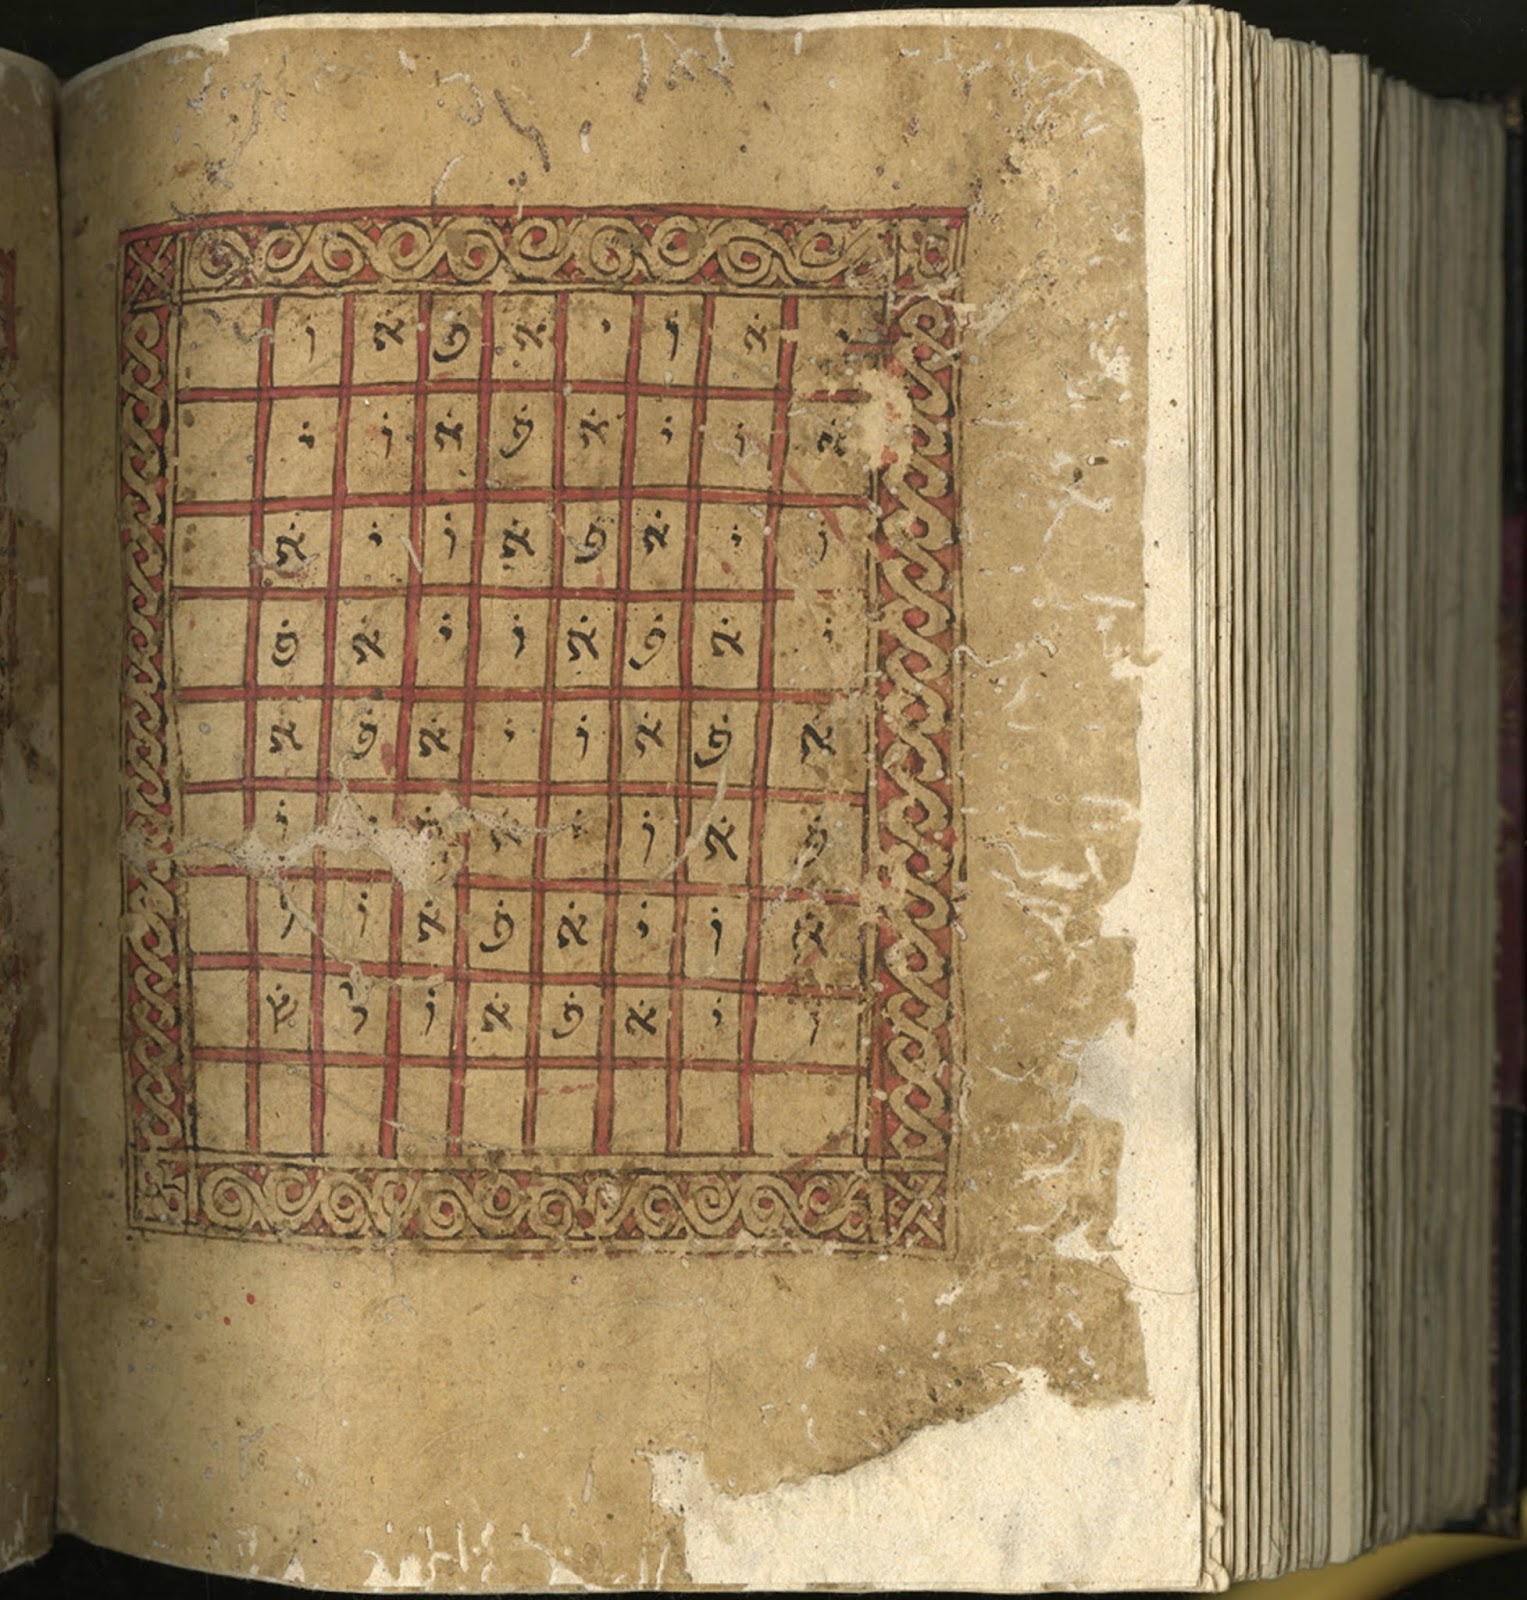 A full-page grid filled with Hebrew characters.